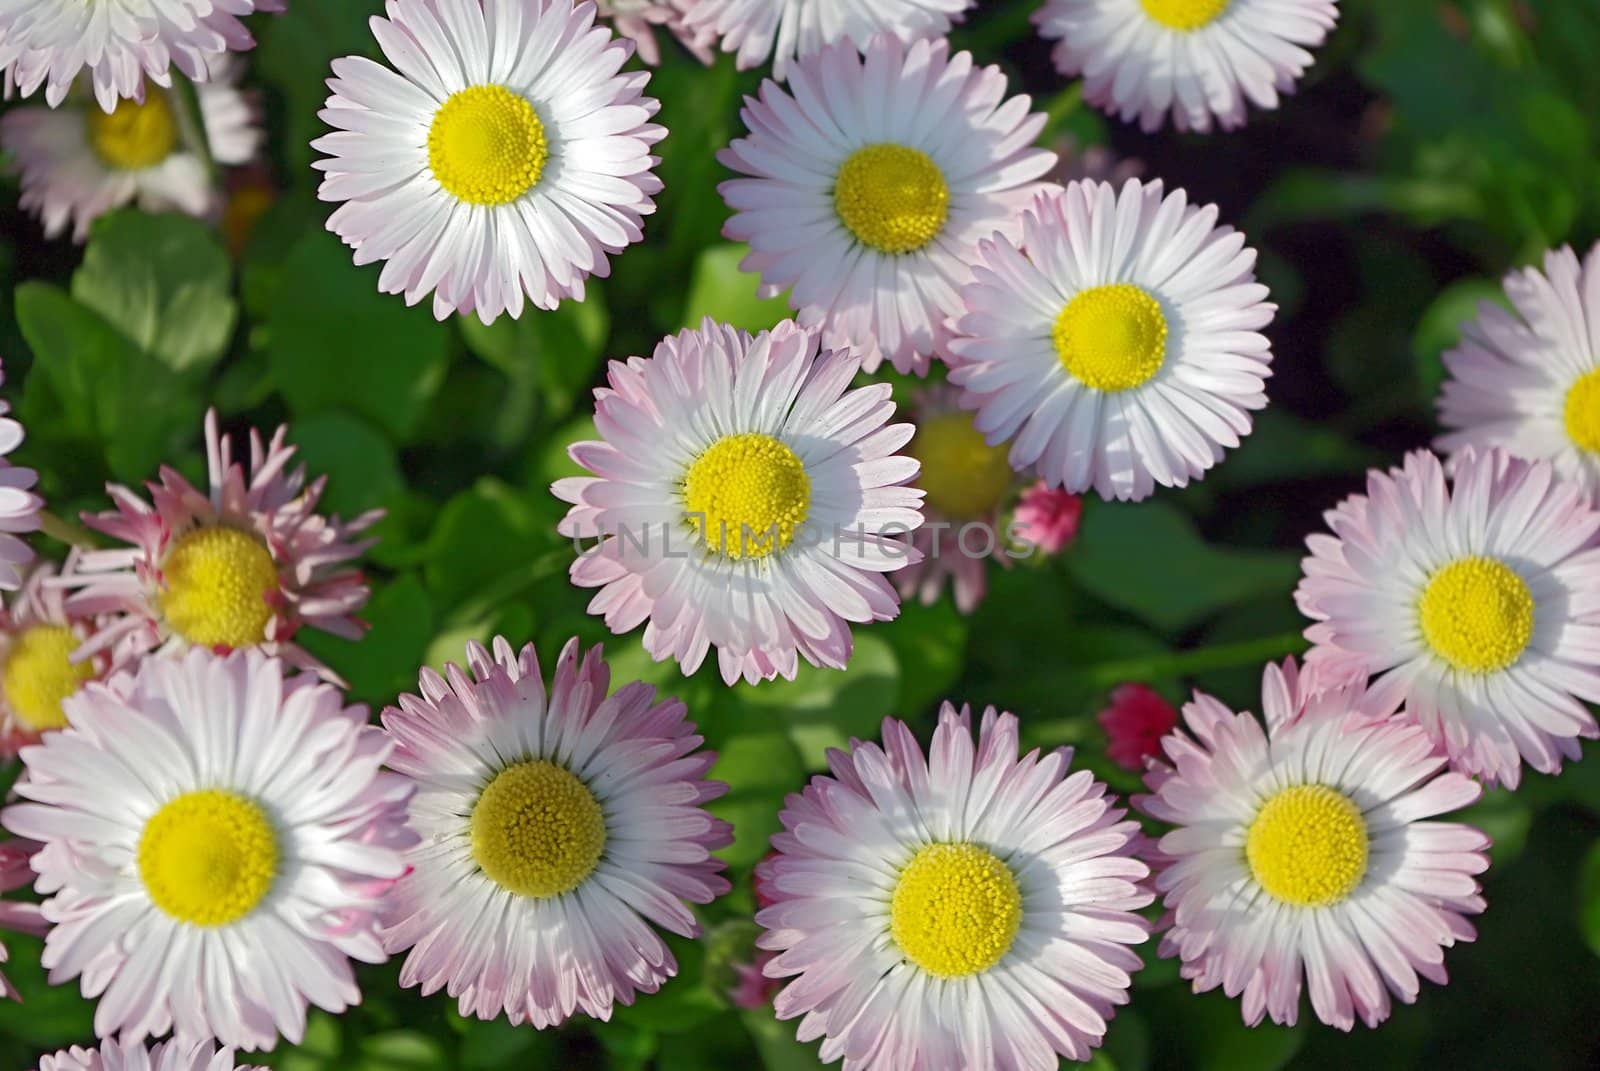 A bed of white-pink marguerites by Vitamin